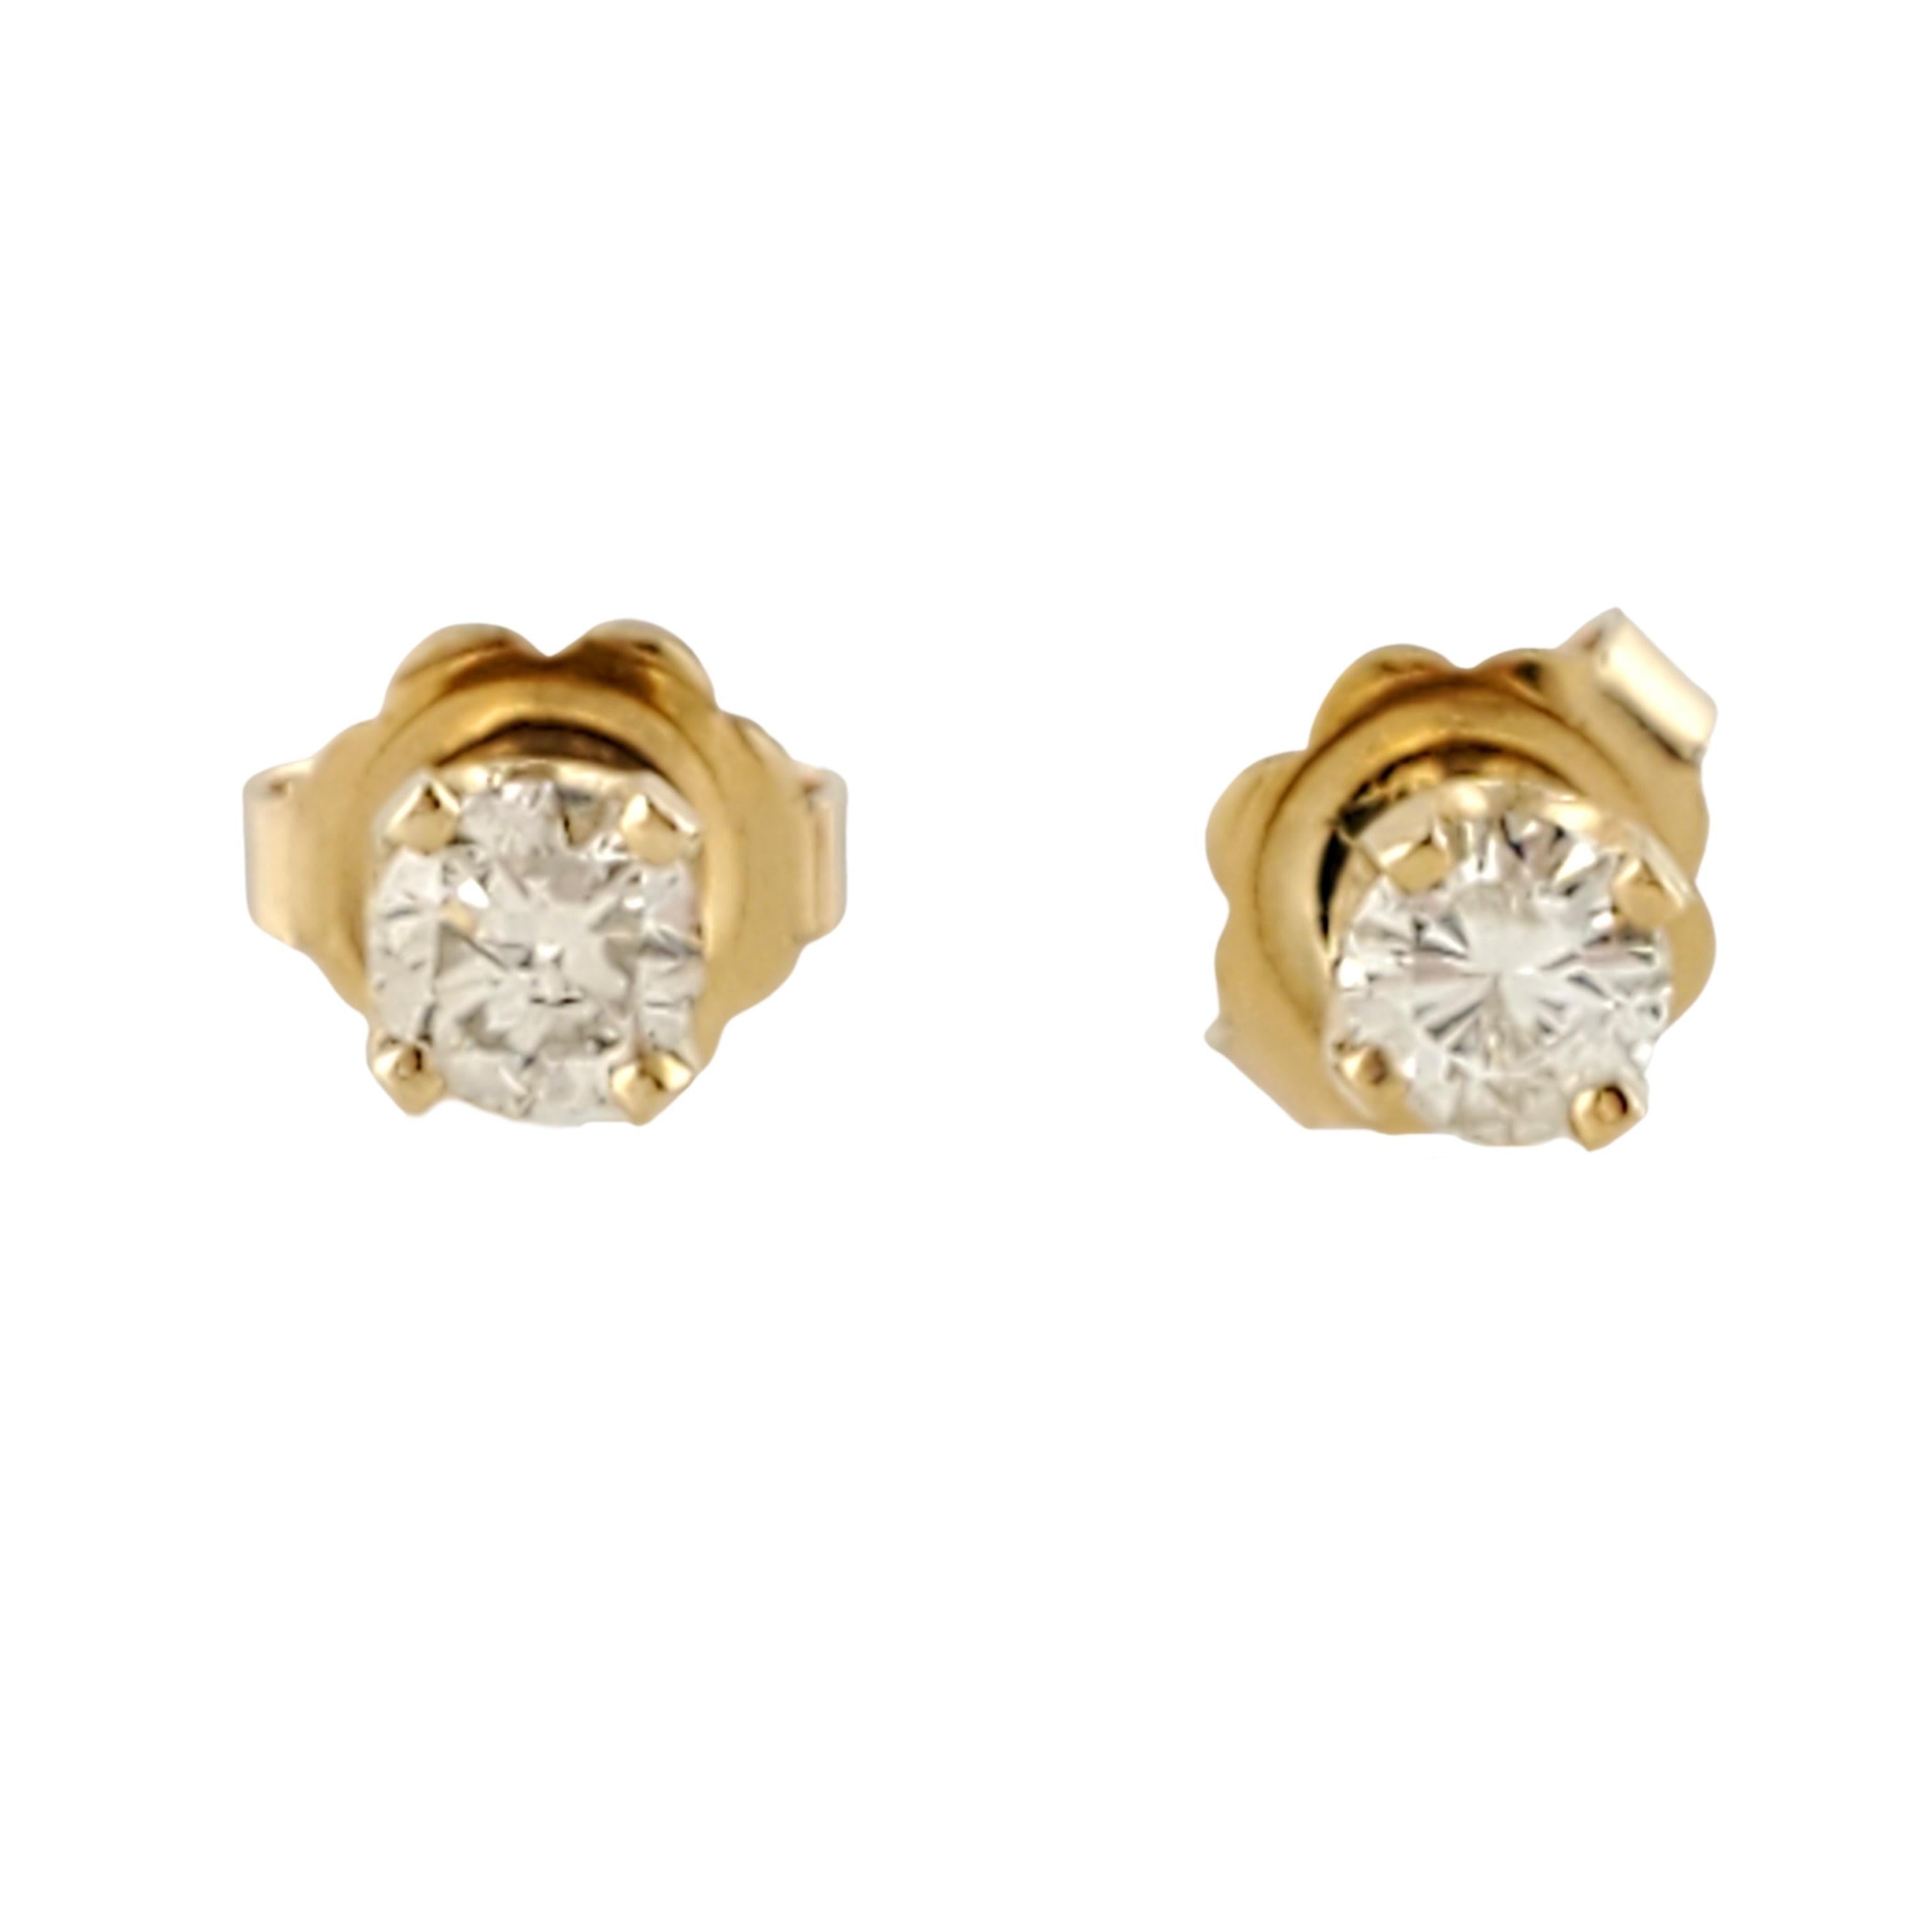 Vintage 14 Karat Yellow Gold Diamond Stud Earrings .28 ct.
These classic stud earrings each feature one round brilliant cut diamond (.14 ct.) in a four prong yellow gold setting. Approximate total diamond weight: .28 ct. Diamond color: J Diamond